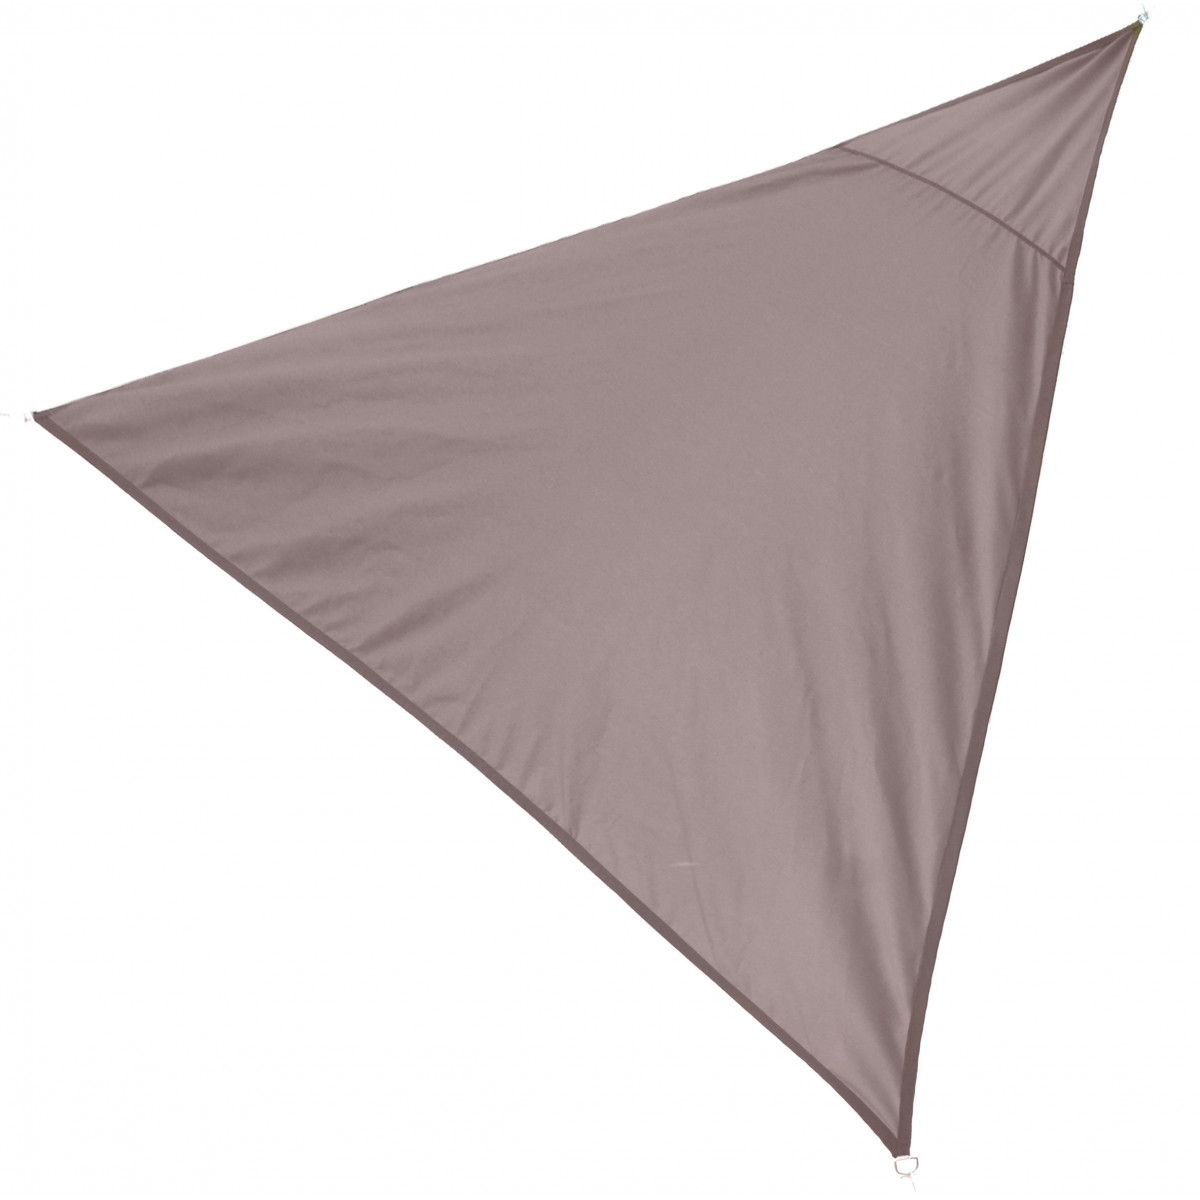 Toile ombrage triangulaire taupe - 300x300x300cm